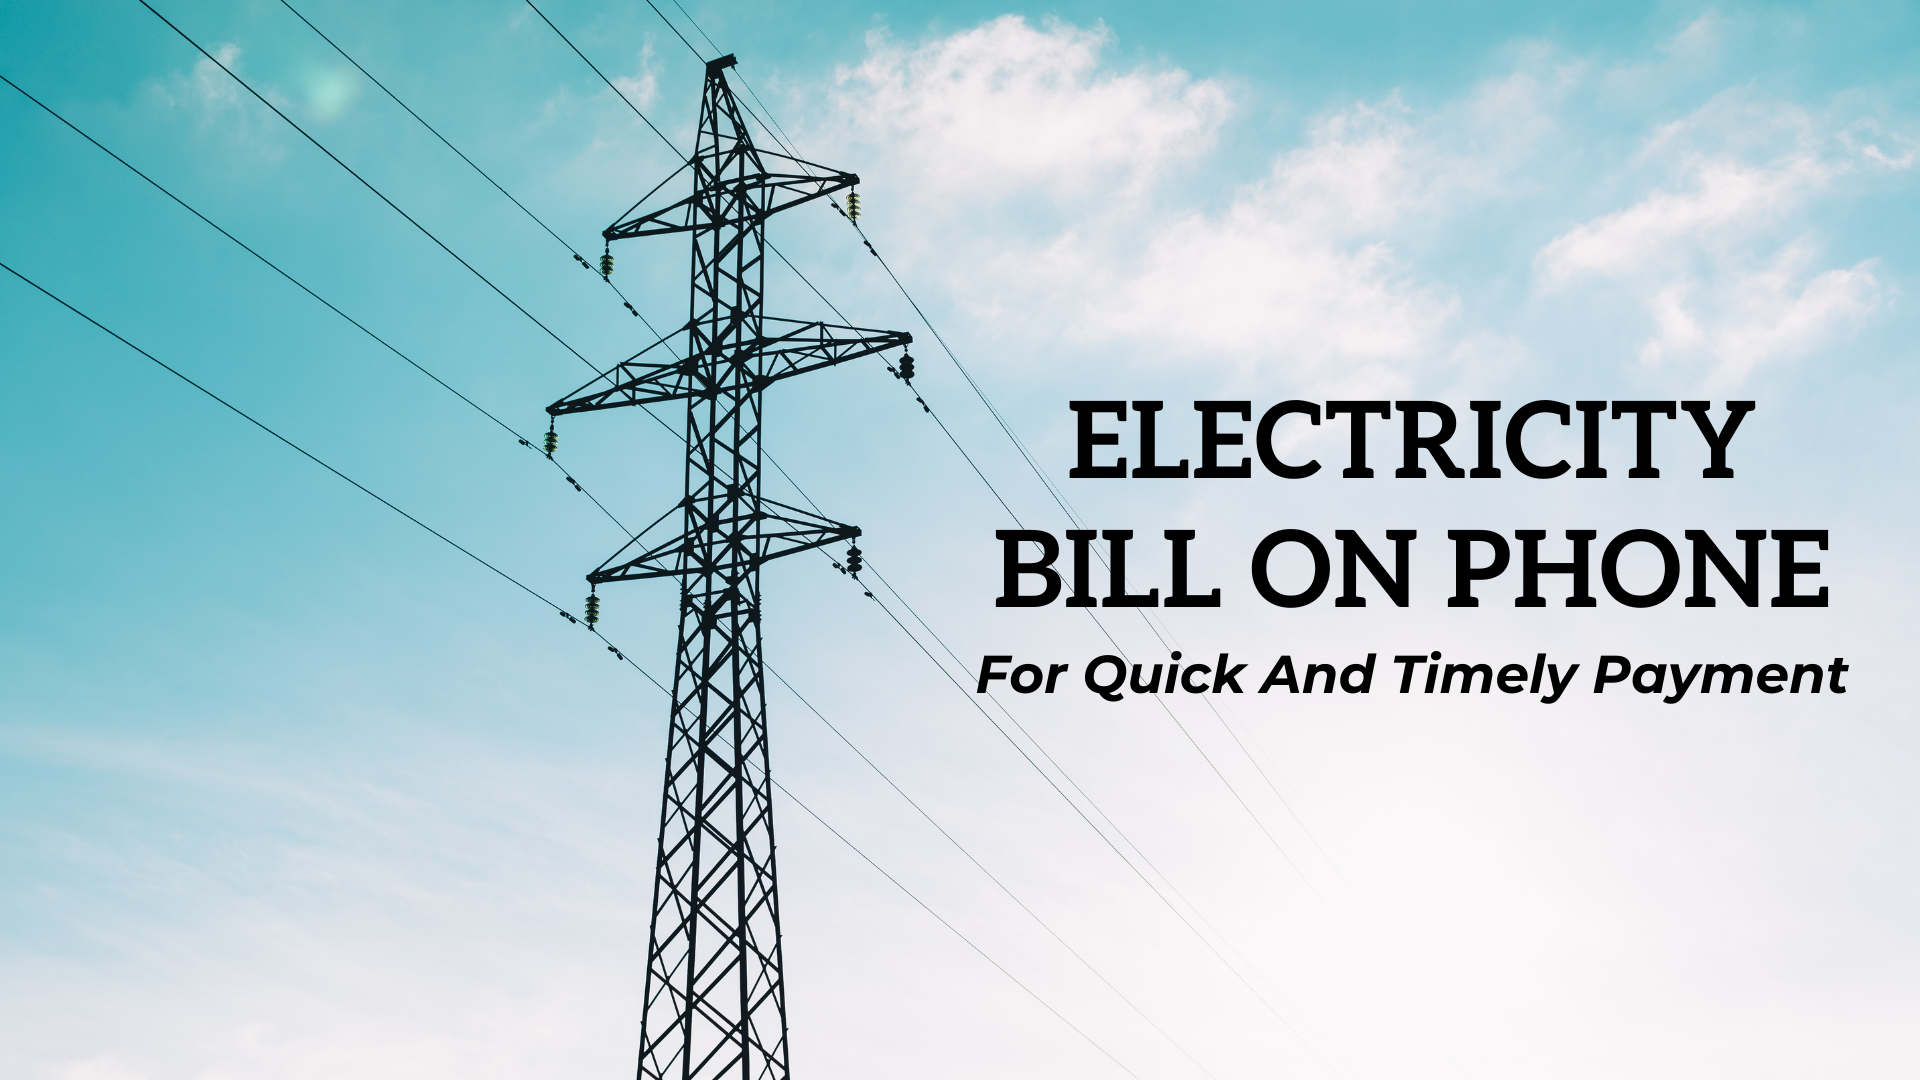 How To Check Electricity Bill On Phone - For Quick And Timely Payment